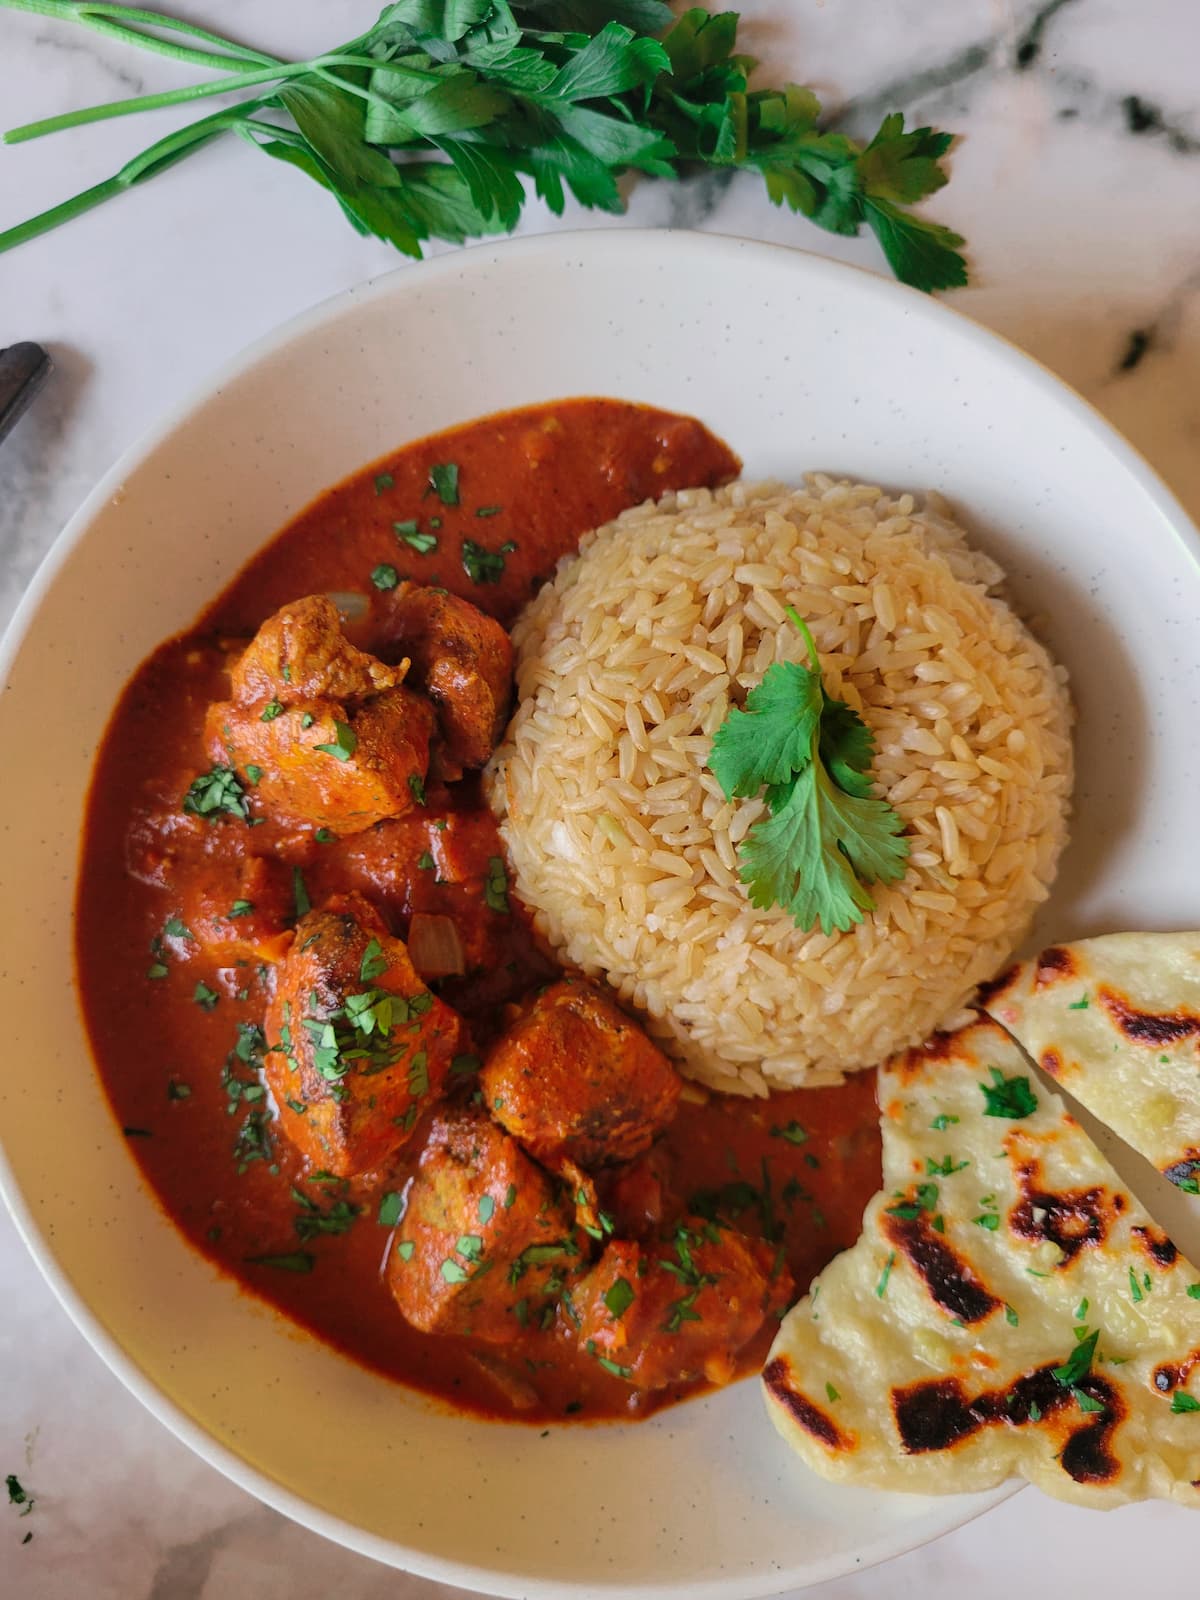 bowl of butter chicken served with rice and naan bread, garnished with fresh chopped parsley